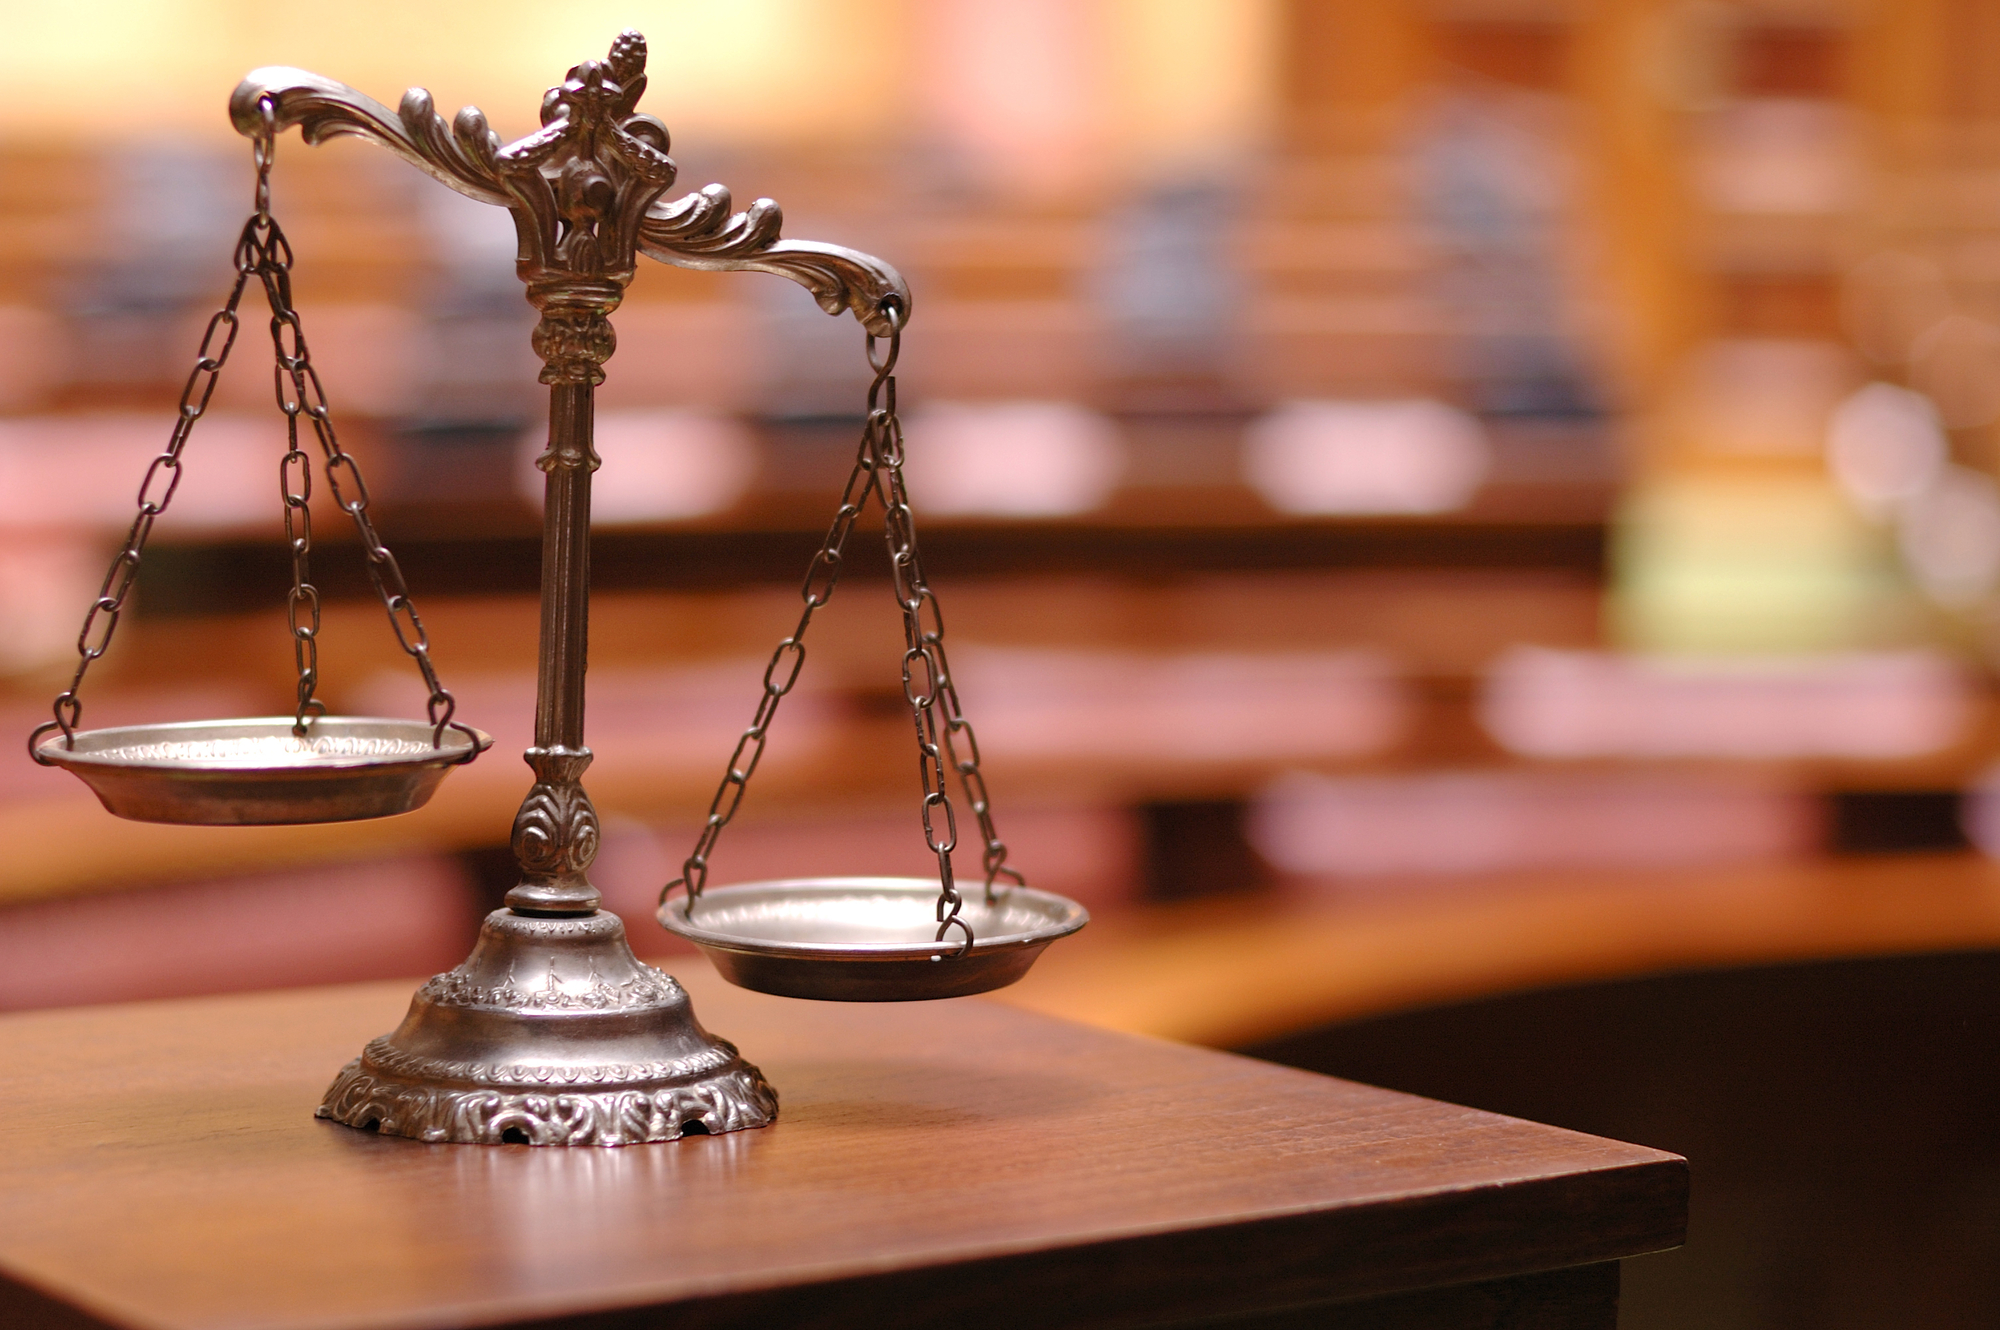 A good criminal defense attorney can make sure the scales of justice tip in your favor.